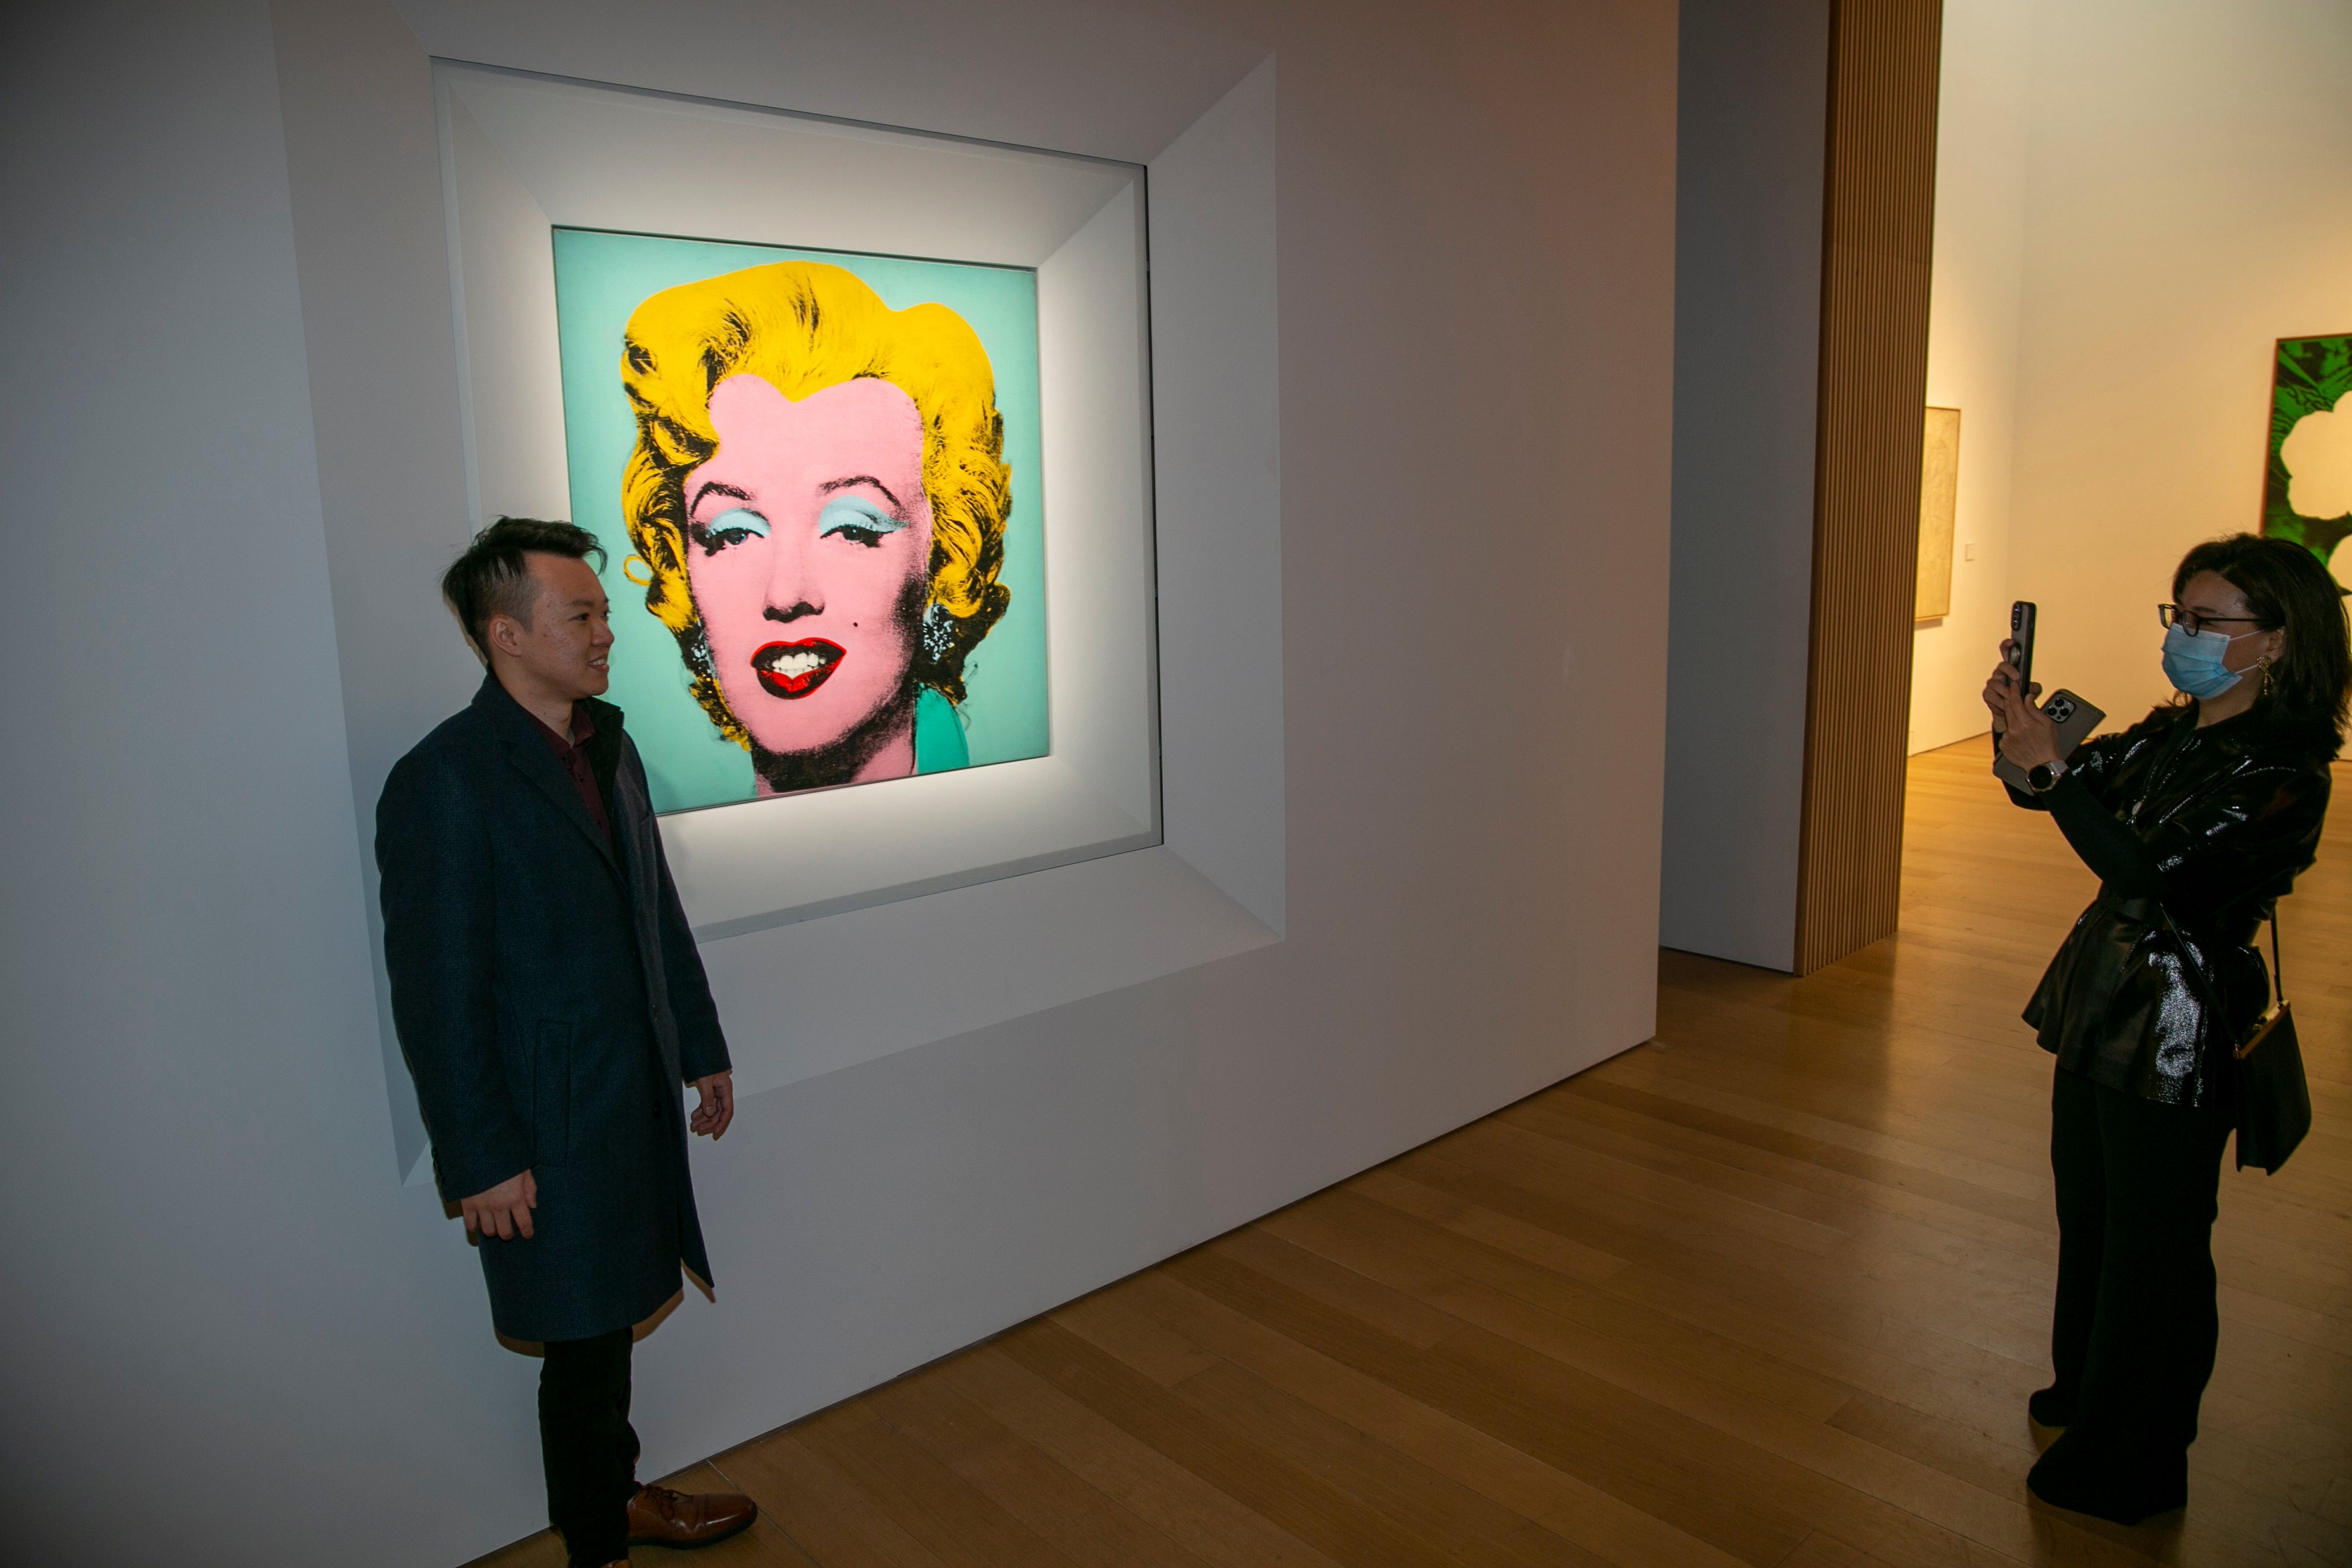 The famous image shows a close up portrait of actress Marilyn Monroe, depicted in vibrant block colours (Ted Shaffrey/AP))